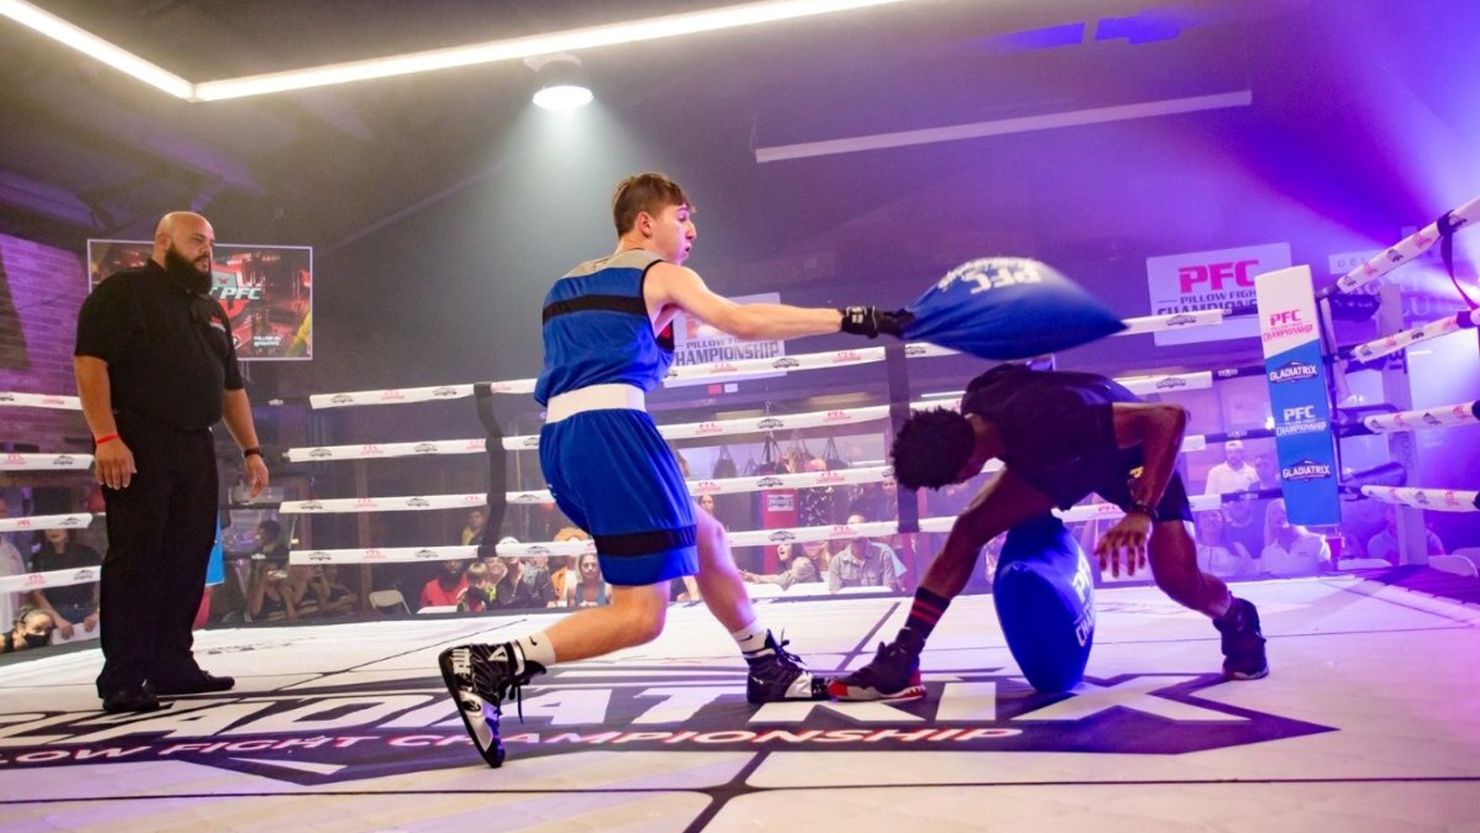 Competitors battle it out in alternating rounds in the ring and on